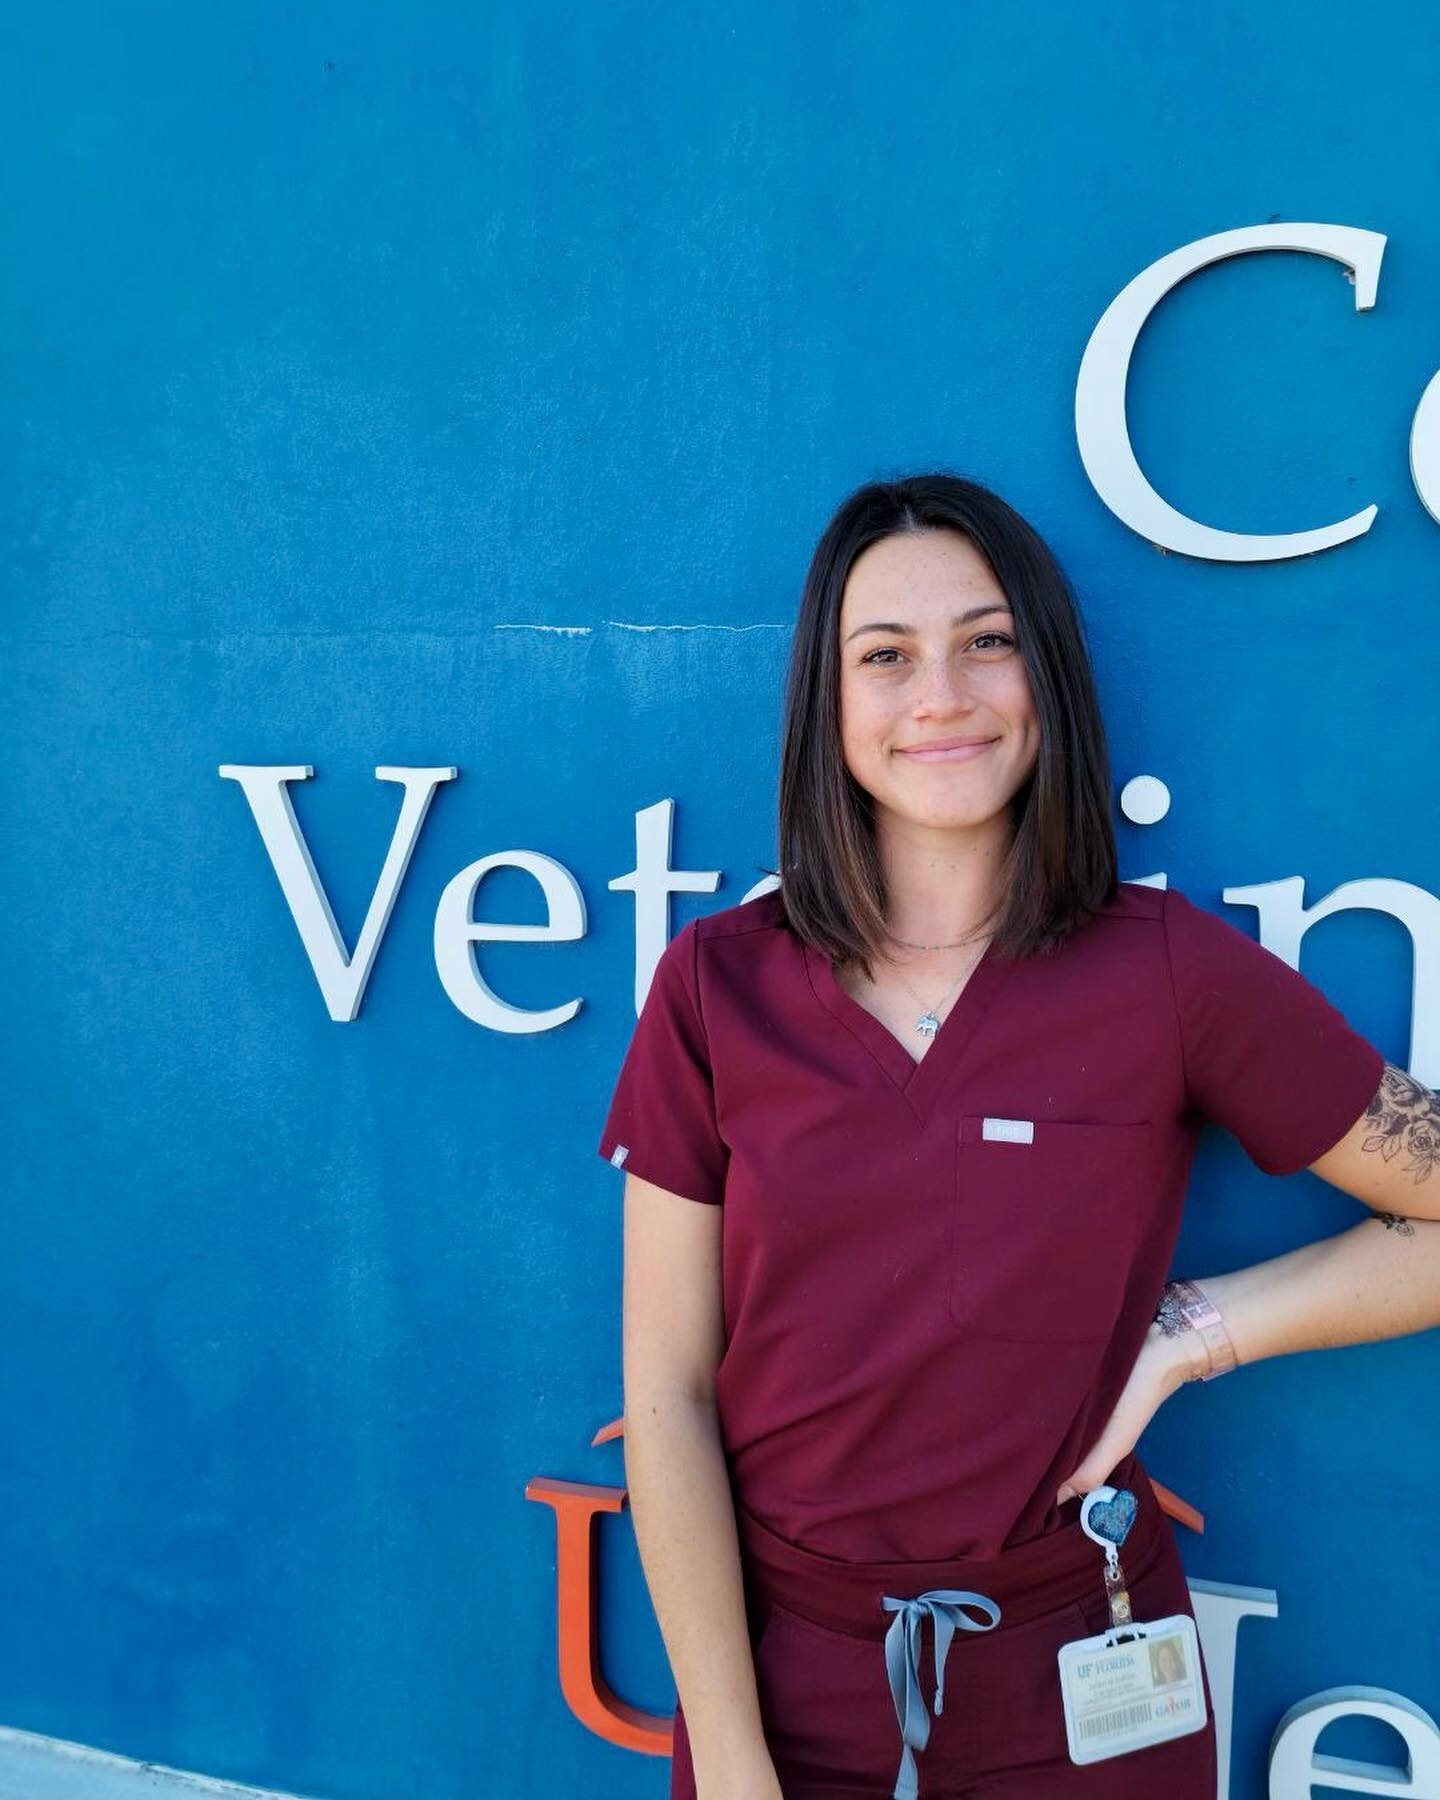 Sunday Appreciation Post 💕 we want to congratulate @jordysullz on her new journey into Vet School 🐾 her passion for Paws translates in both her profession and while helping to make your fur babies feel Pawfect 💕🐶☀️Thank you for all your hard work